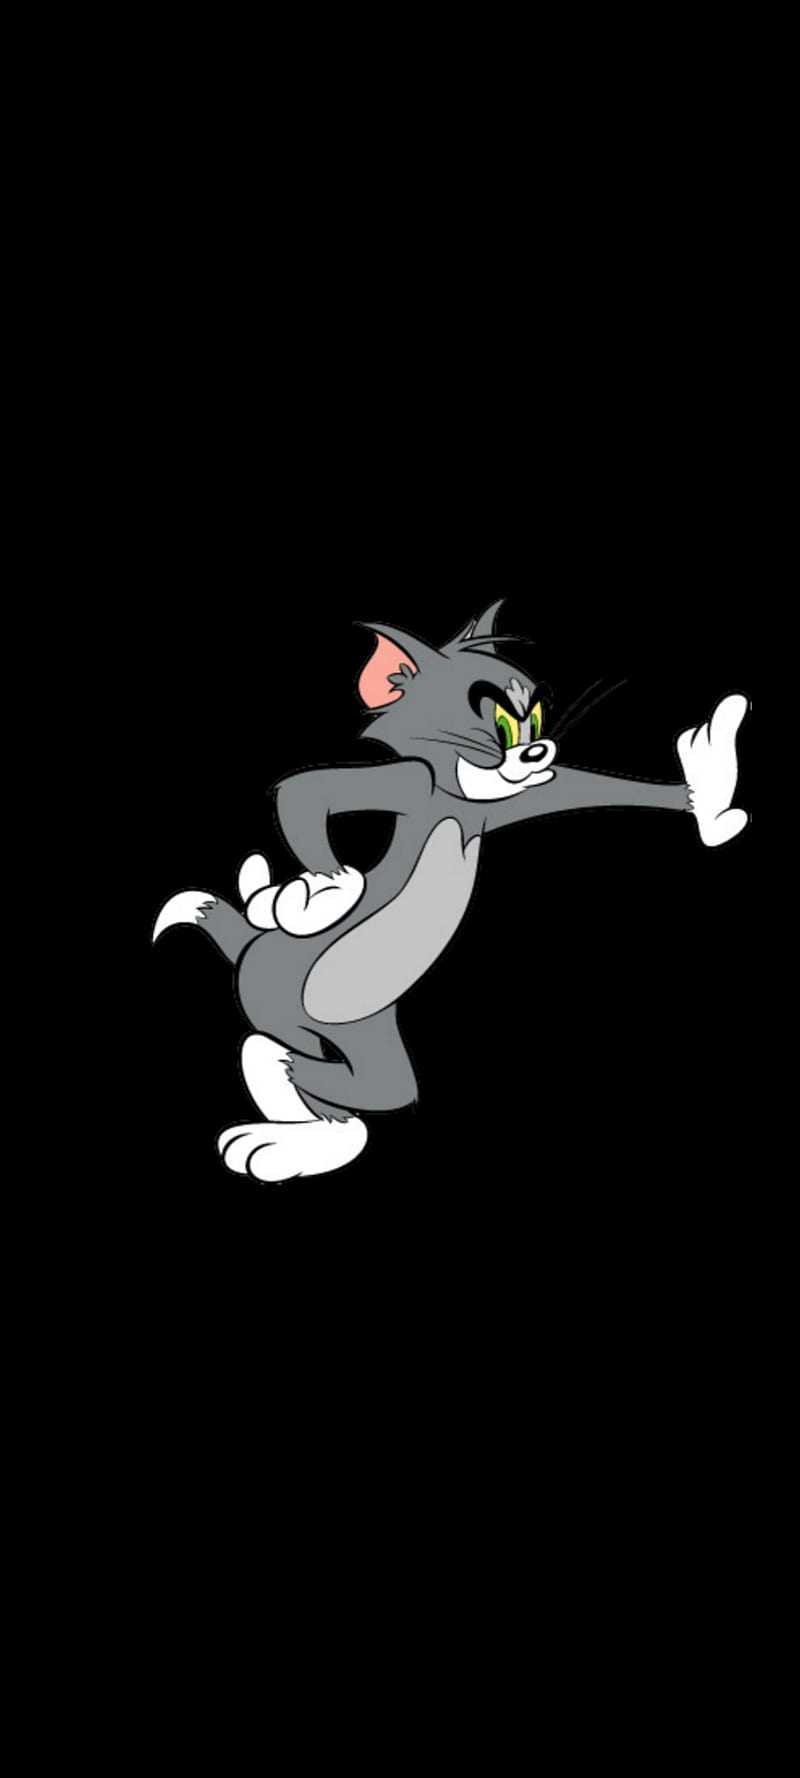 Tom cat wallpaper for iPhone from the 2020 wallpaper collection - Tom and Jerry